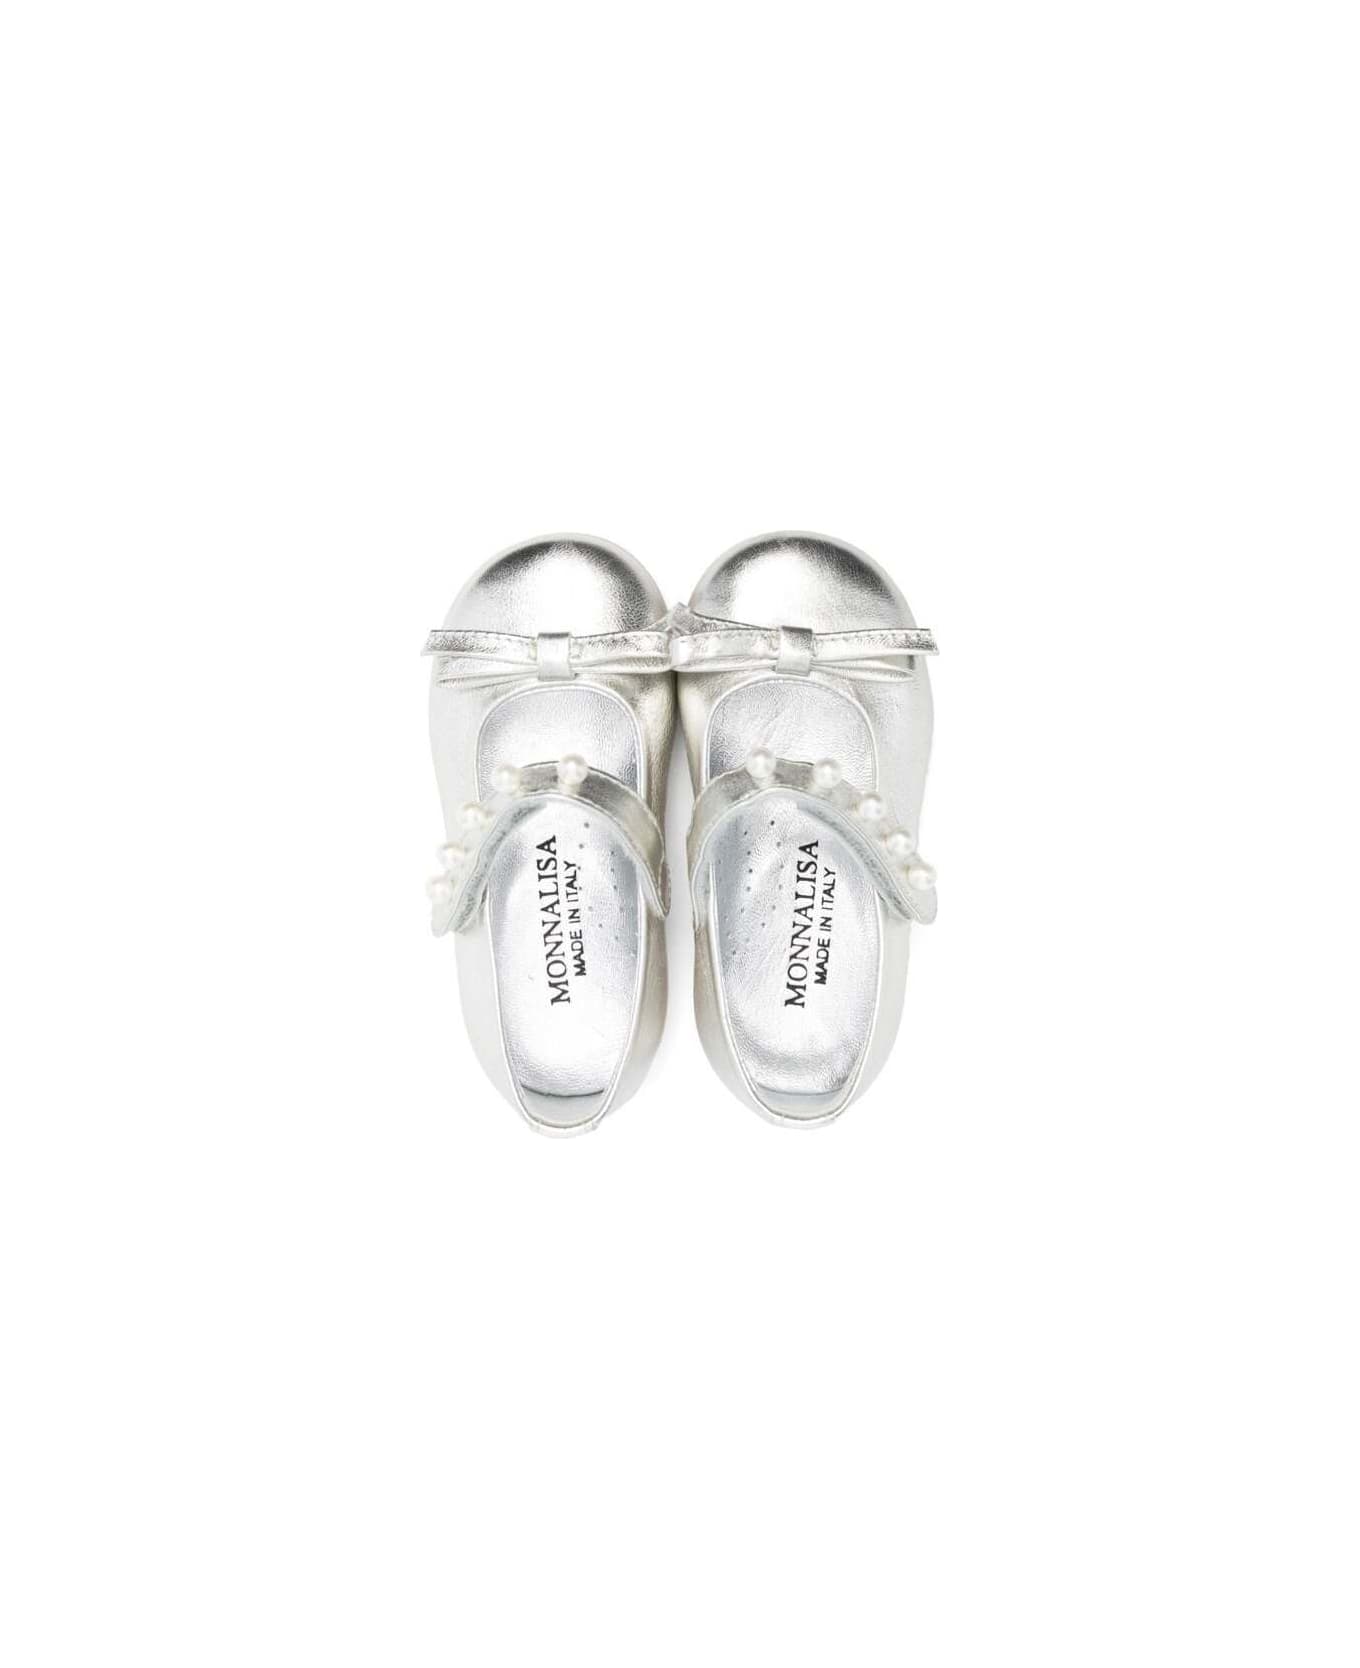 Monnalisa Silver Ballet Flats With Pearls And Bow Detail In Laminated Leather Girl - Metallic